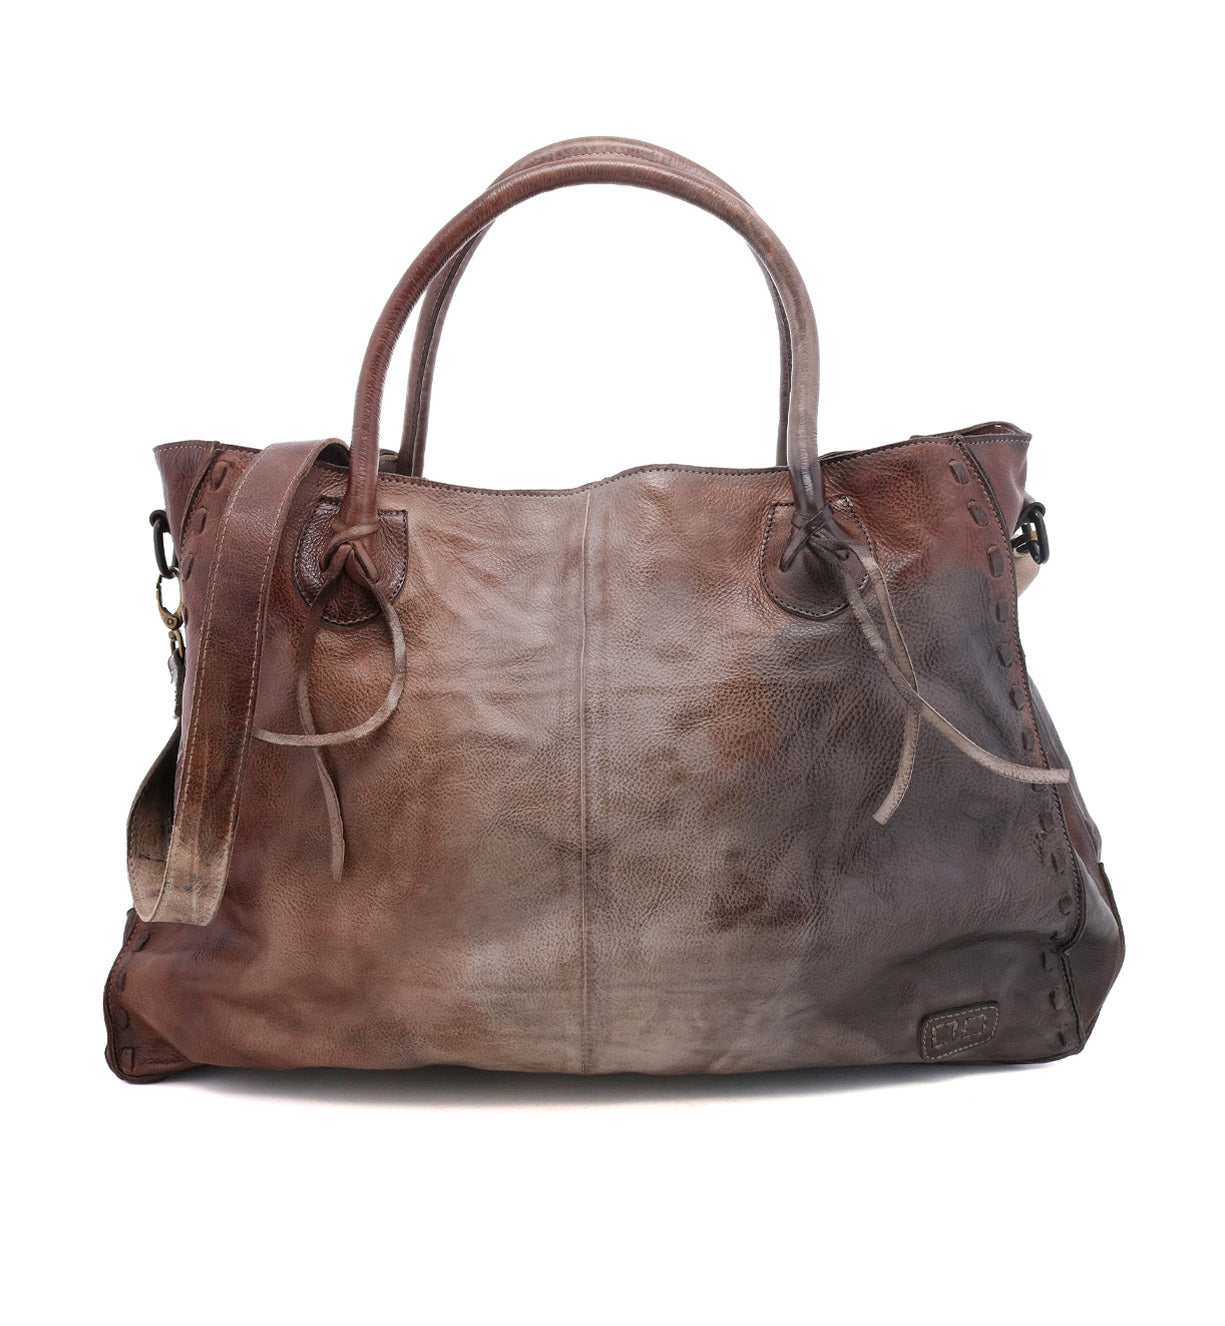 A brown leather Rockaway tote bag with handles from Bed Stu.